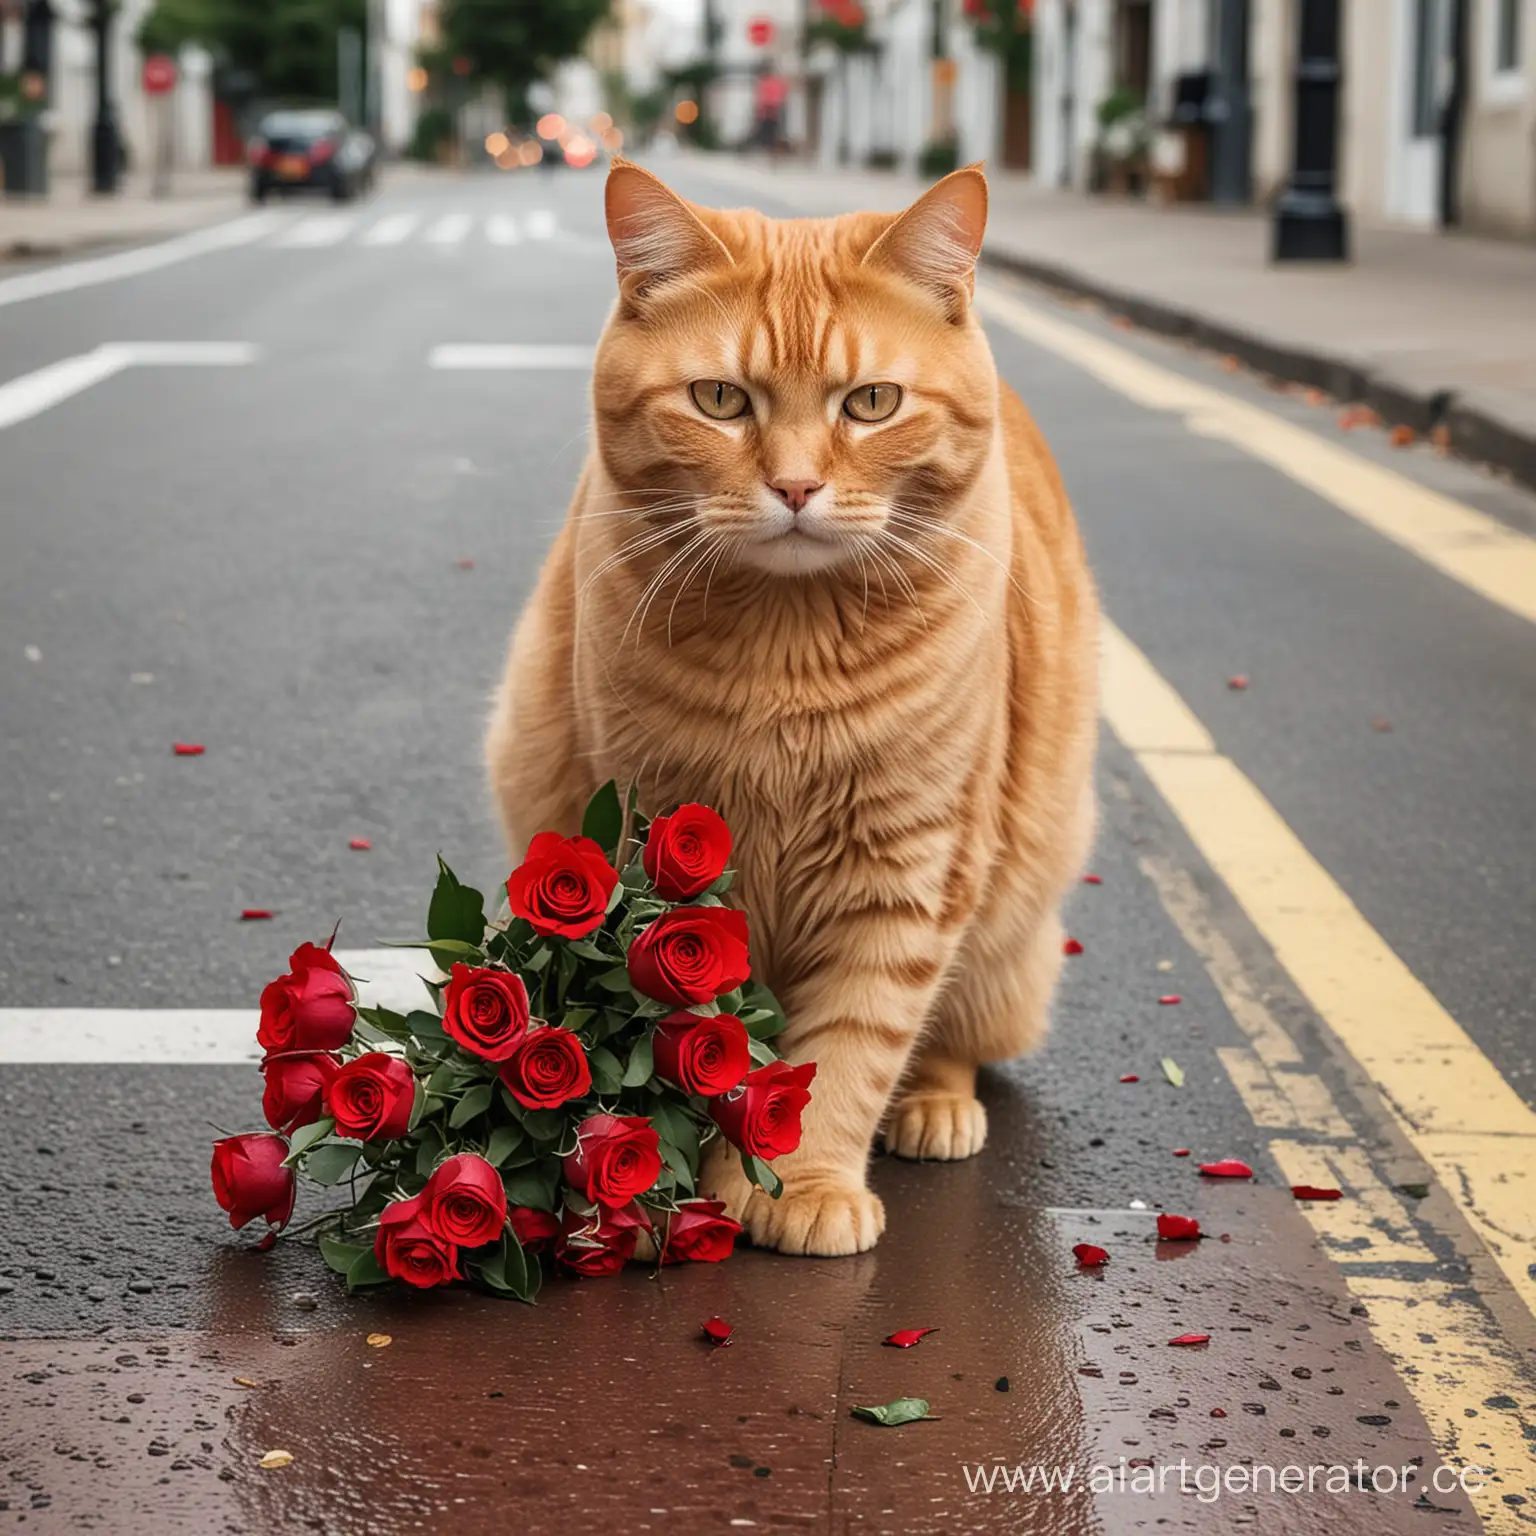 Charming-Fat-Ginger-Cat-Crossing-Pedestrian-Crossing-with-Red-Roses-Bouquet